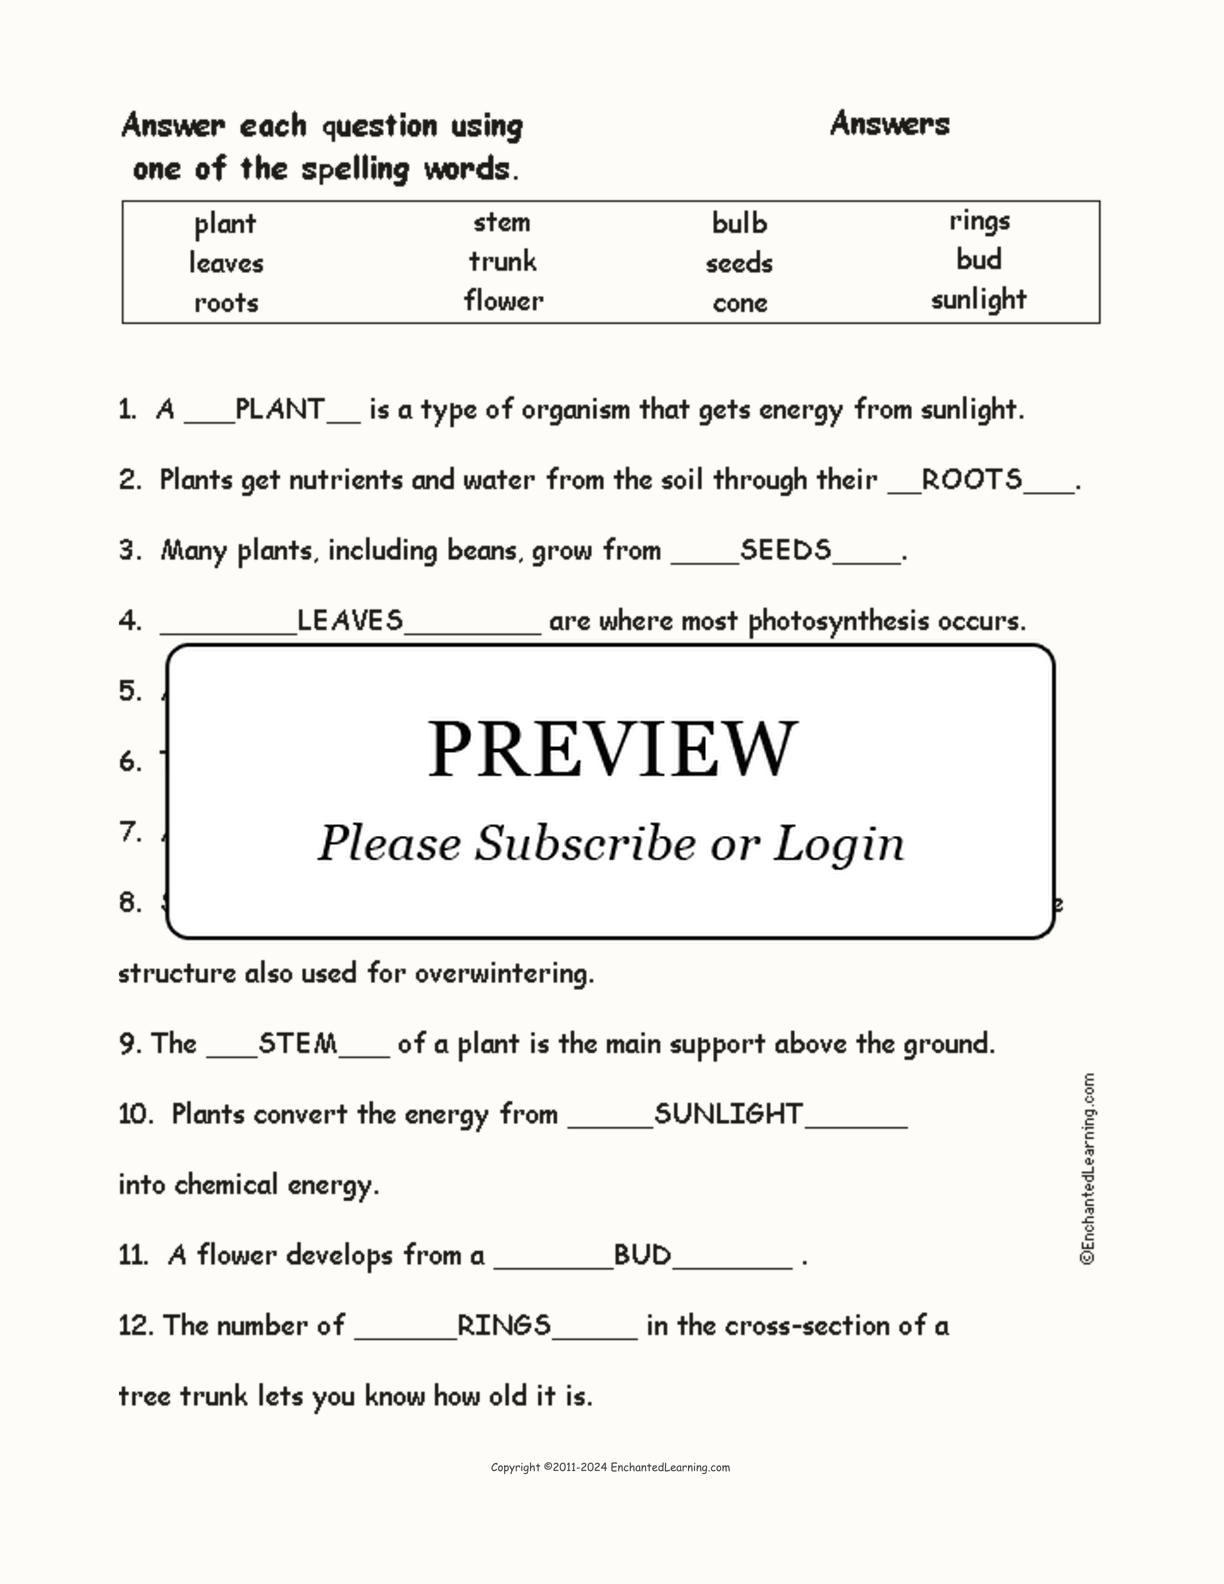 Plant-Related Spelling Word Questions interactive worksheet page 2